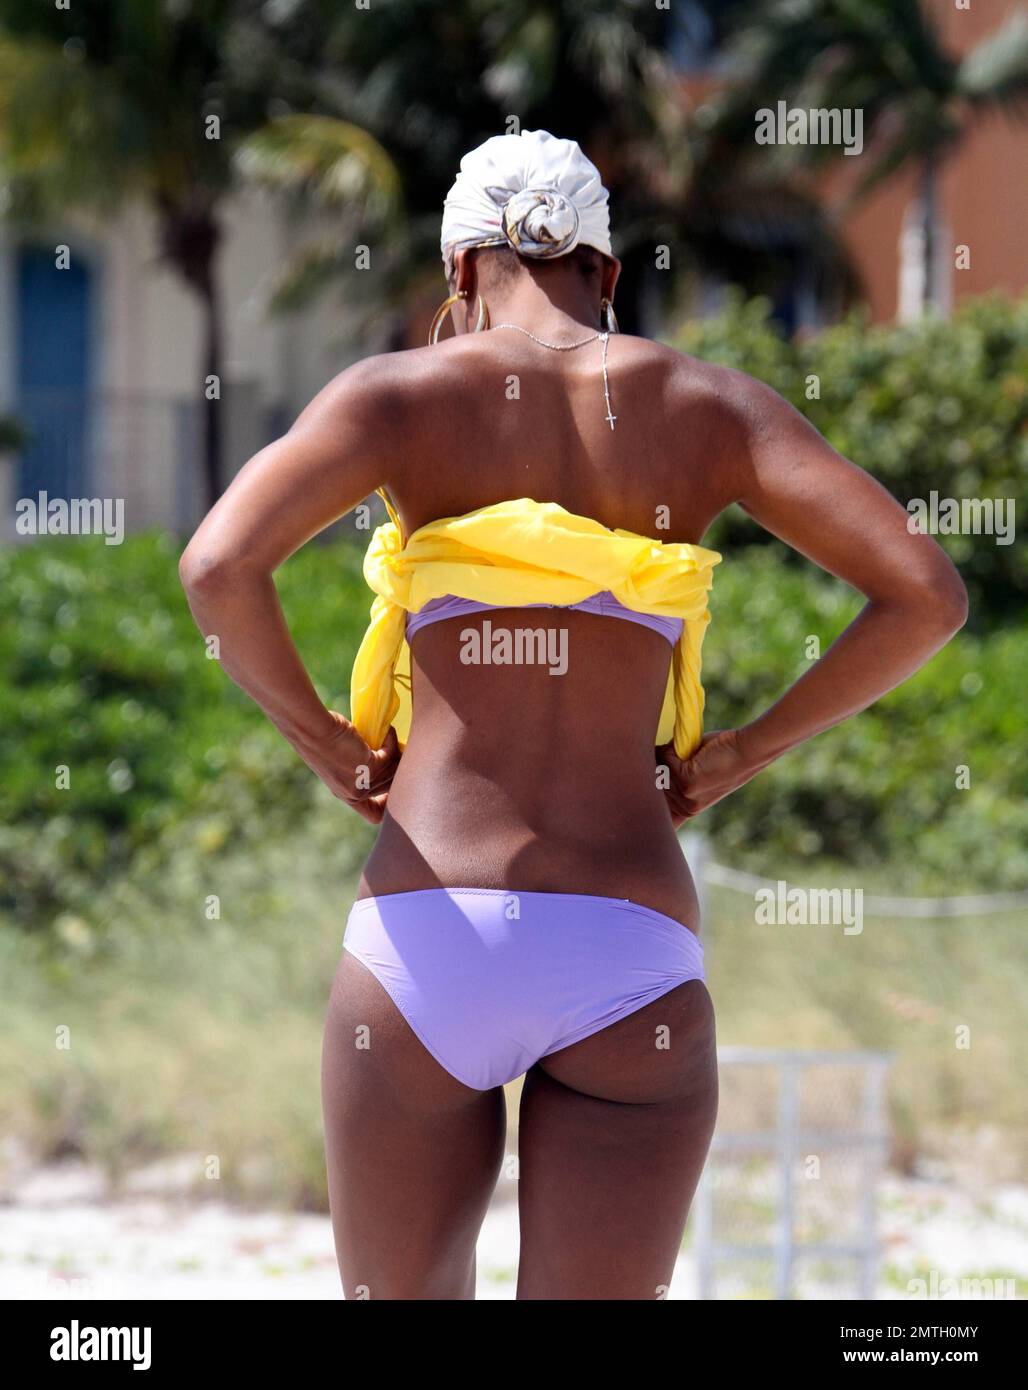 X Factor judge, Kelly Rowland, shows off her enviable figure in a purple  bikini during a relaxing afternoon on the beach before her show tonight at  the American Airlines Arena. Rowland earlier